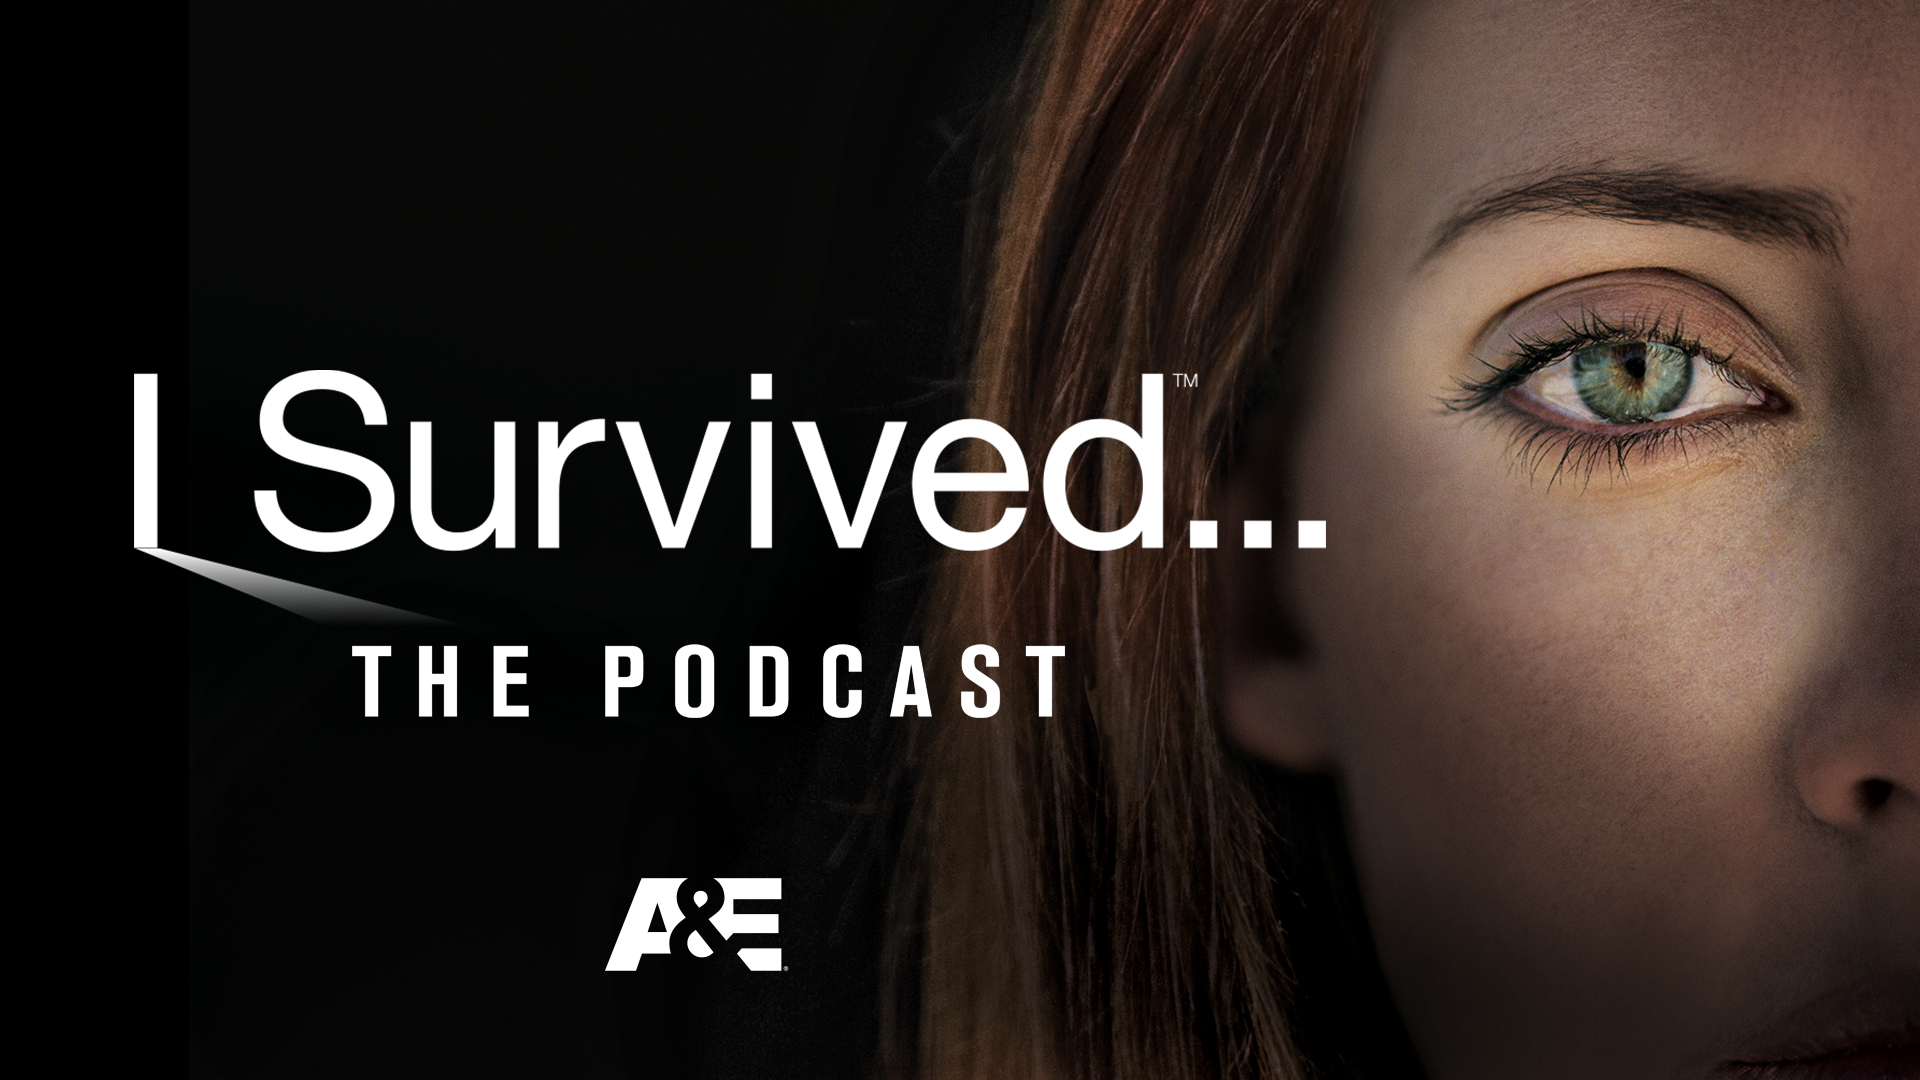 I Survived... the Podcast